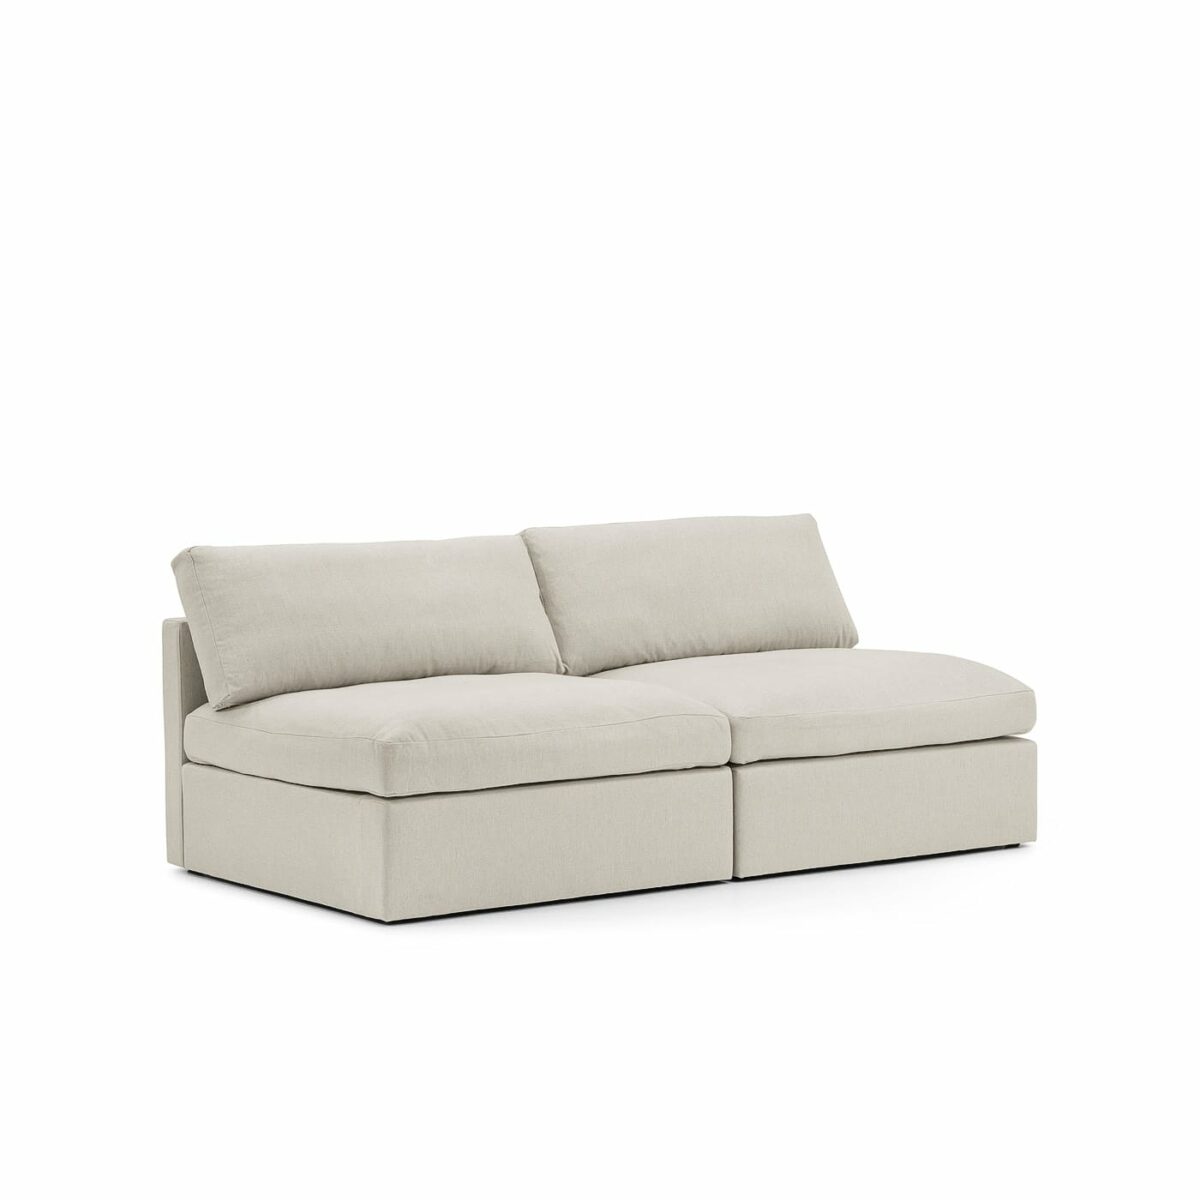 Lucie Grande 2-Seat Sofa (Without Armrests) Off White